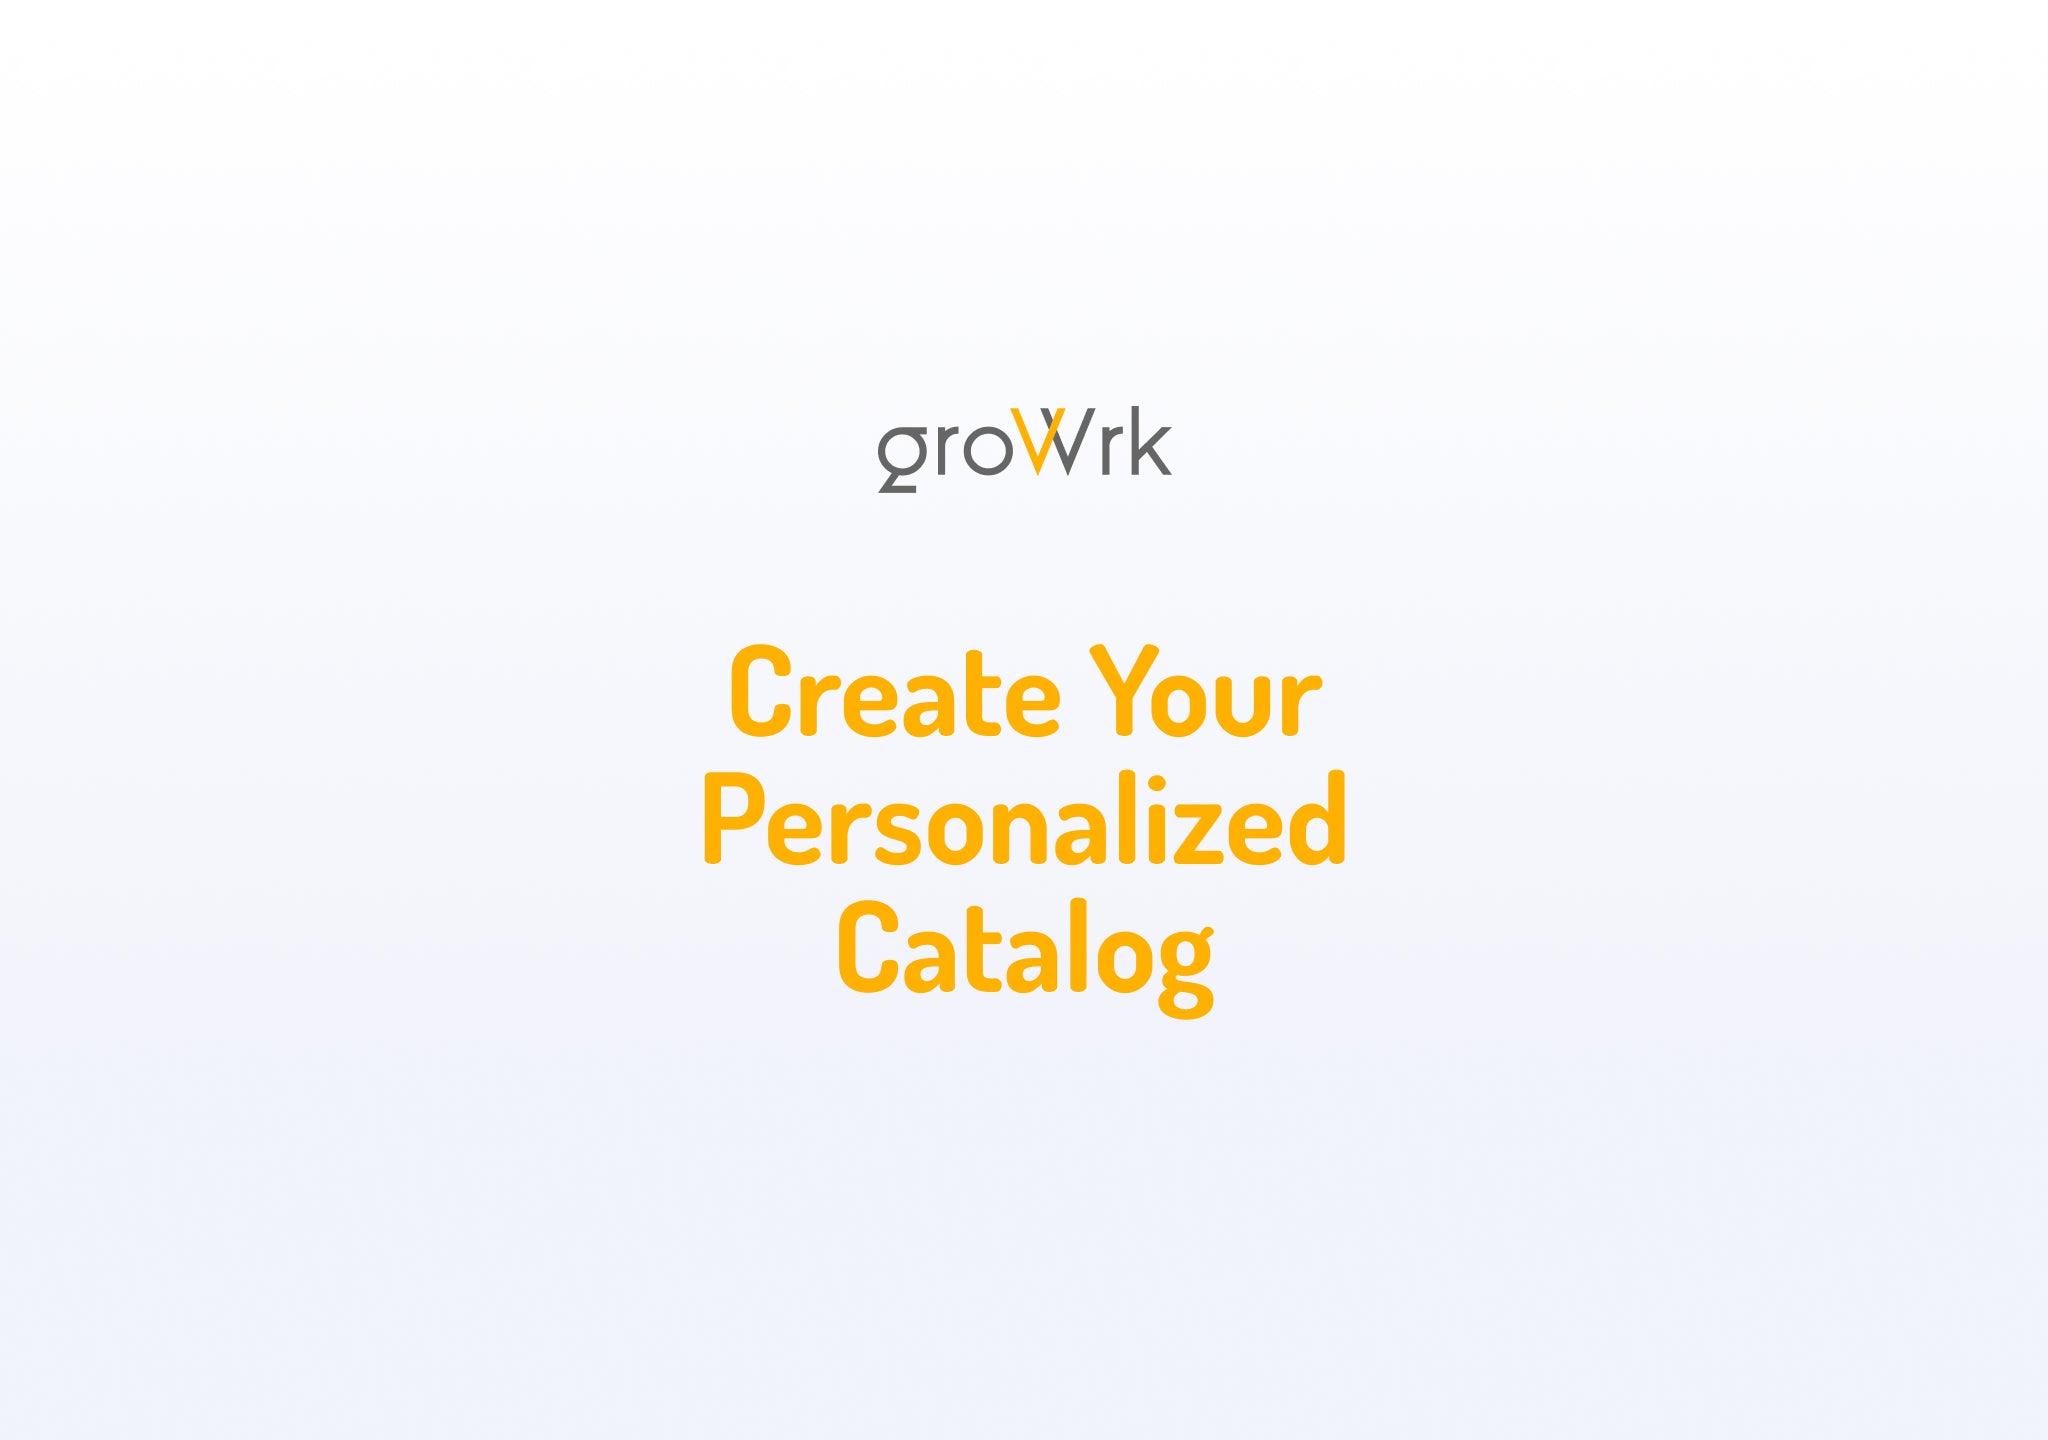 Product Feature: A Personalized Catalog to save time and improve your  experience